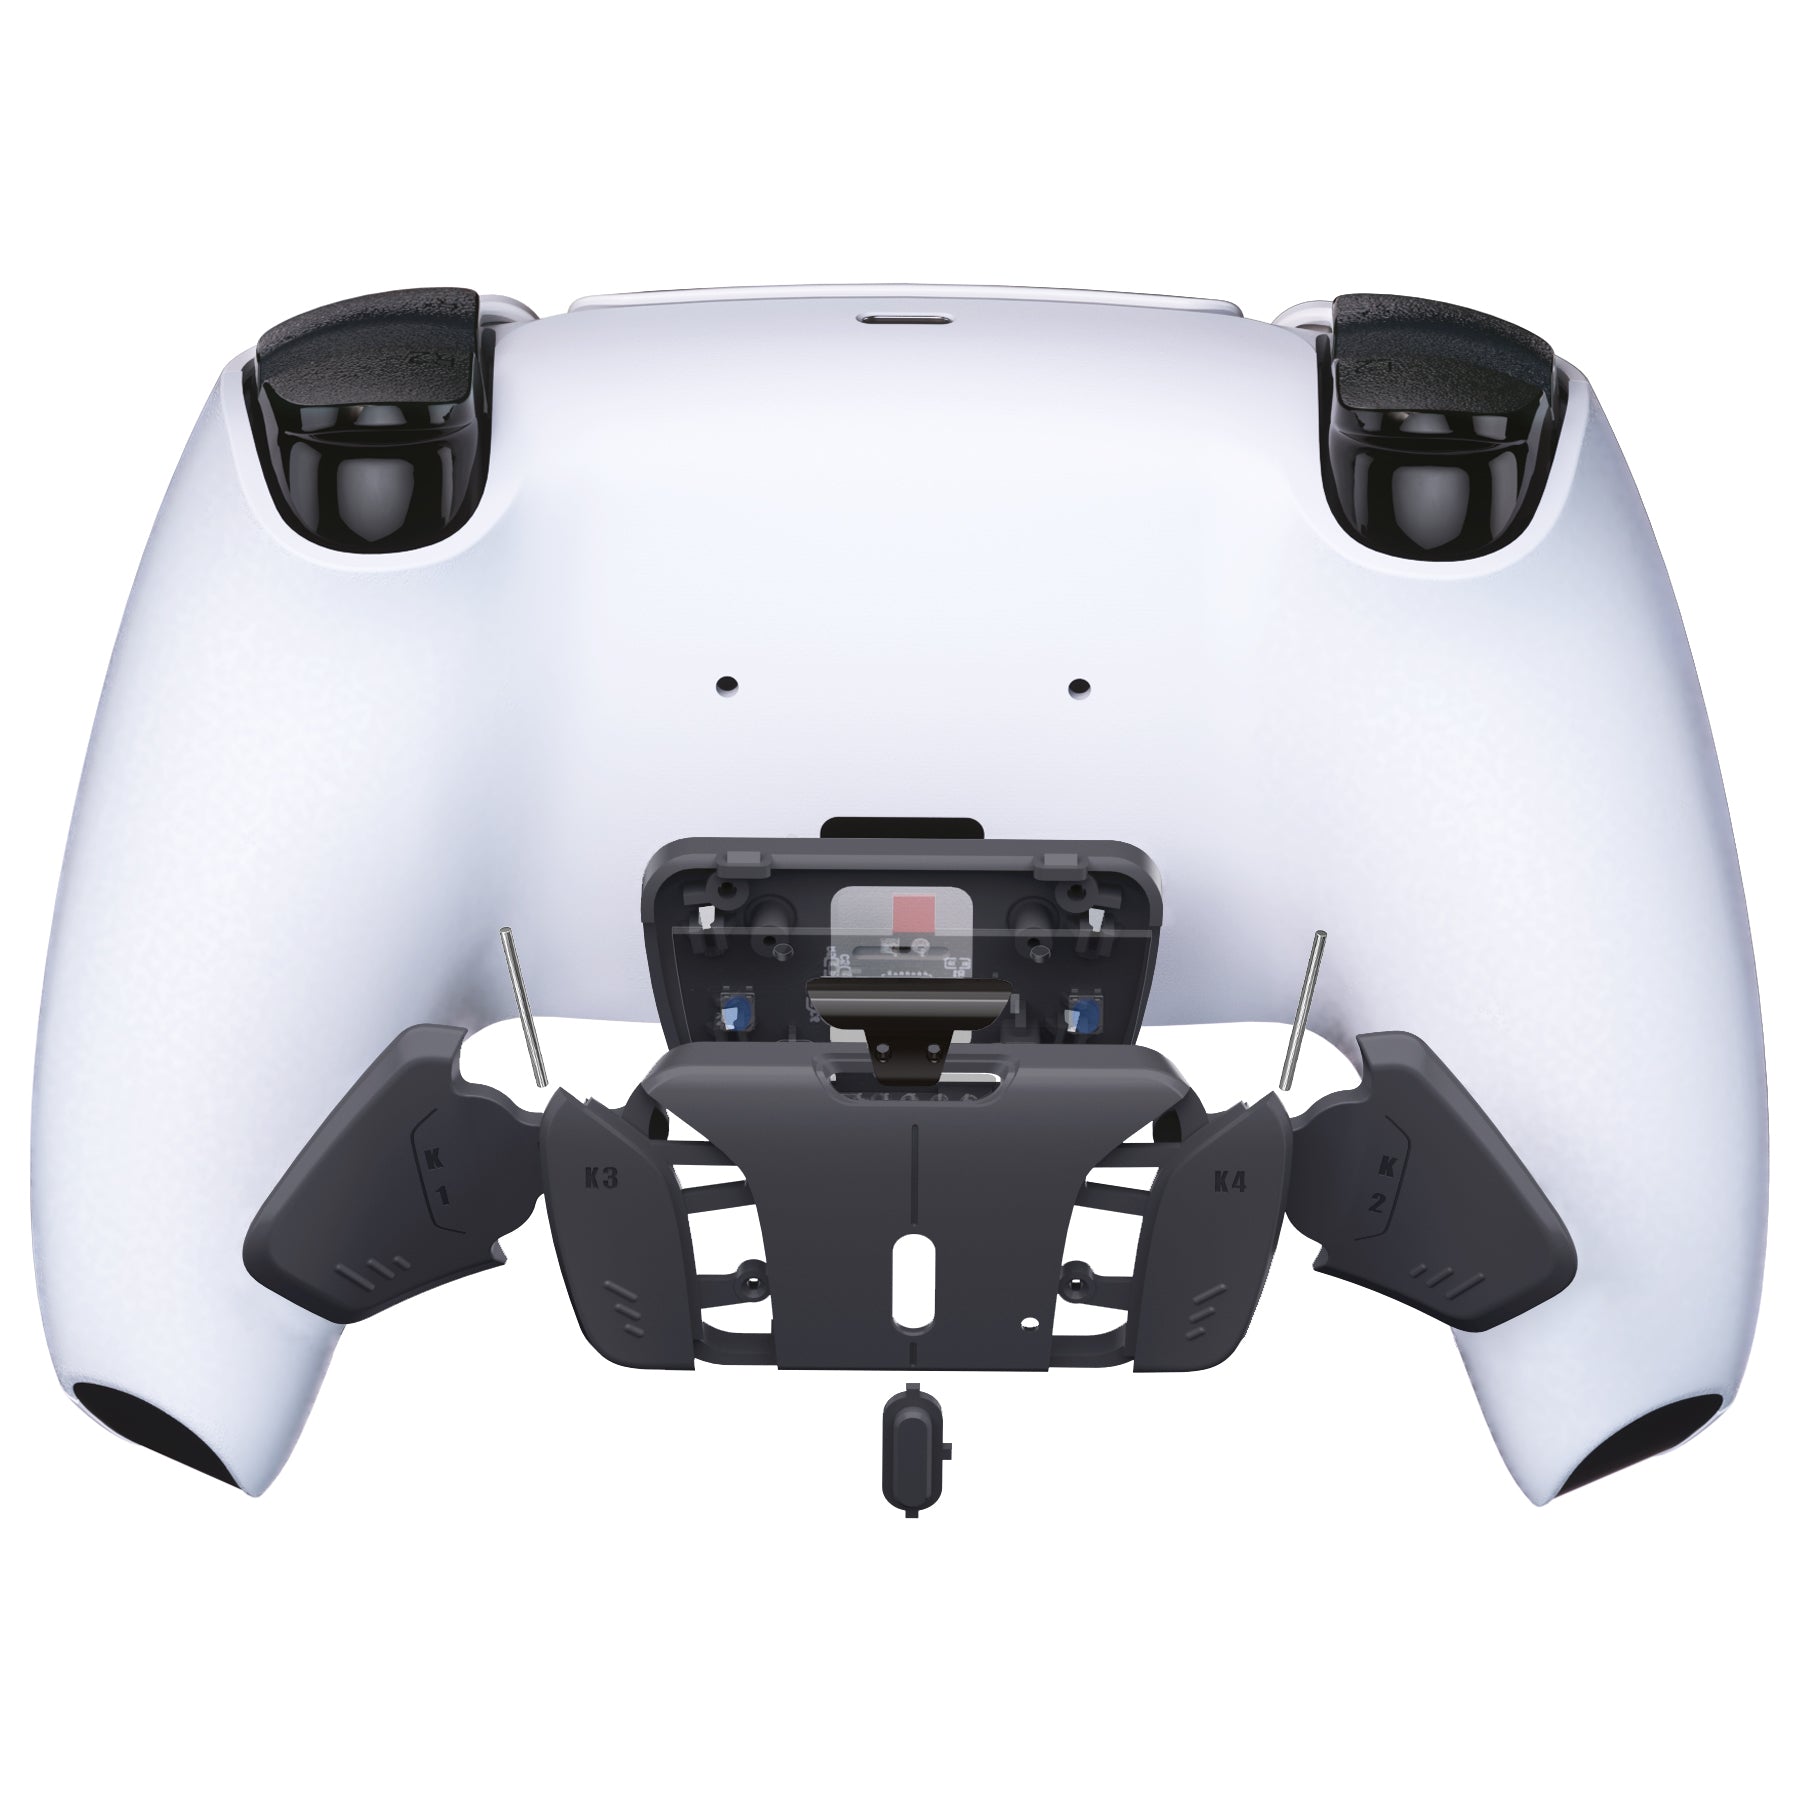 eXtremeRate Retail Classic Gray Replacement Redesigned K1 K2 K3 K4 Back Buttons Housing Shell for PS5 Controller RISE4 Remap Kit - Controller & RISE4 Remap Board NOT Included - VPFM5009